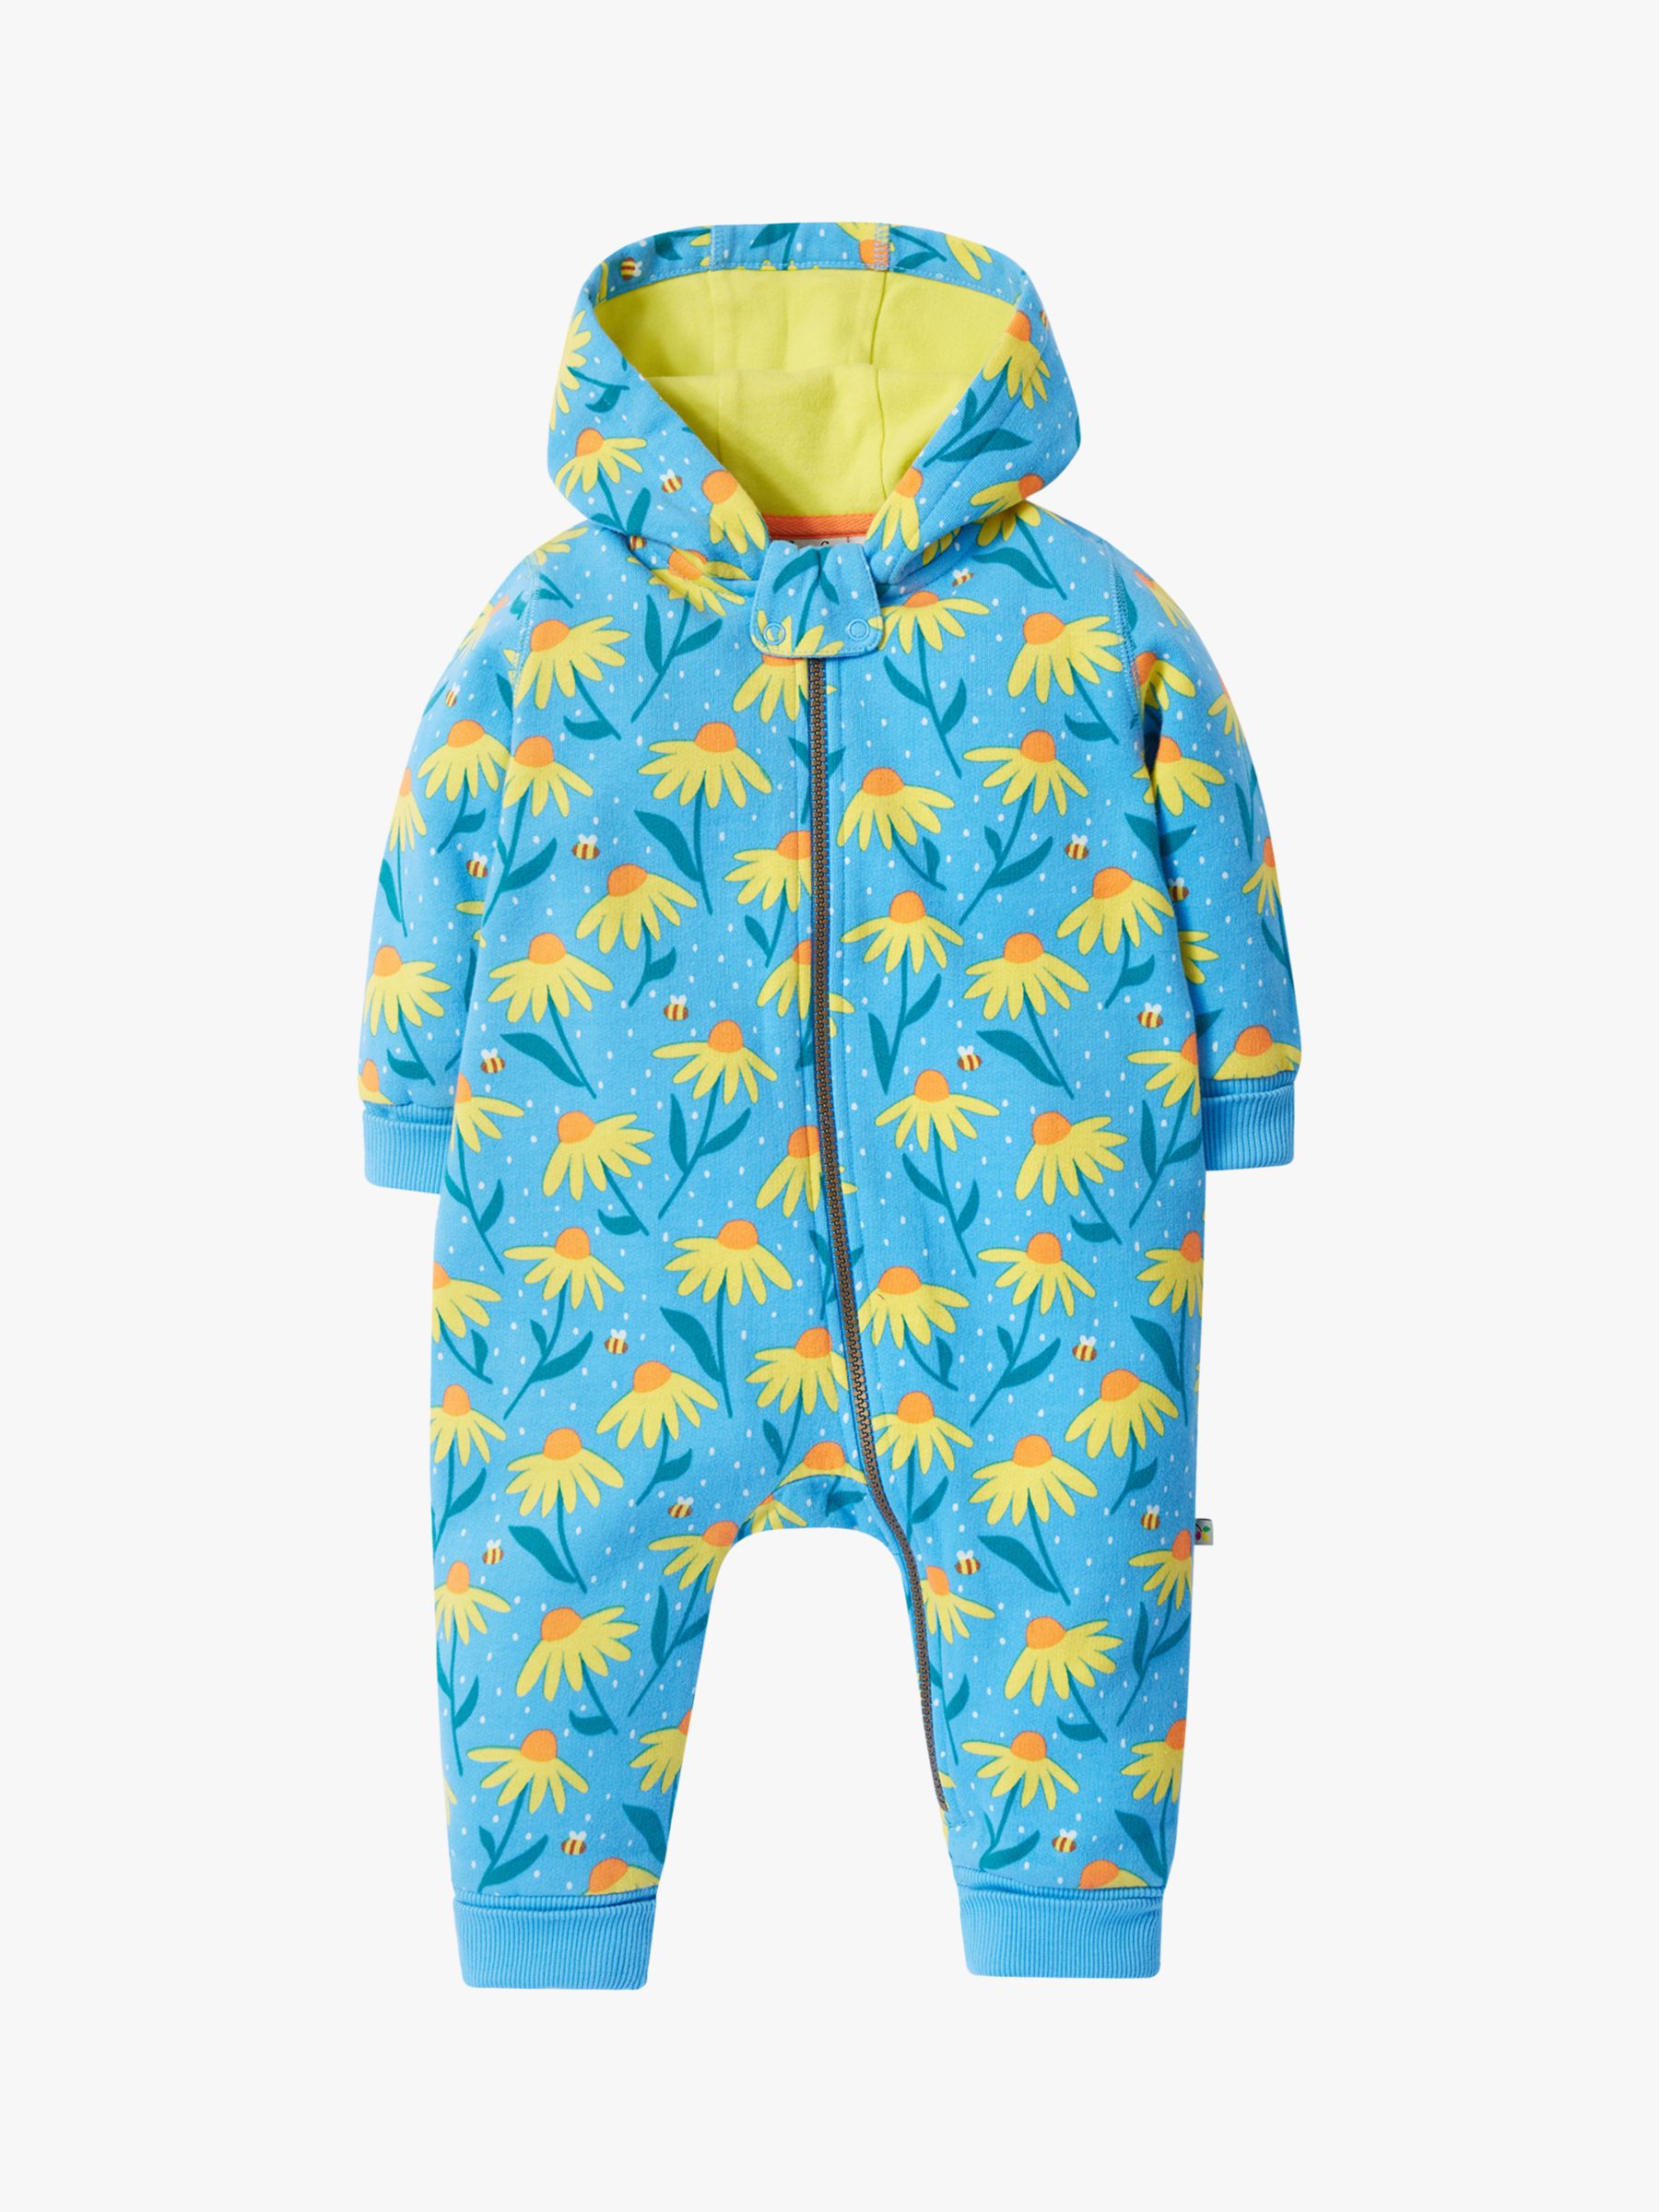 Frugi Baby Organic Cotton Print Hooded Snuggle Suit, Echinacea, 2-3 years